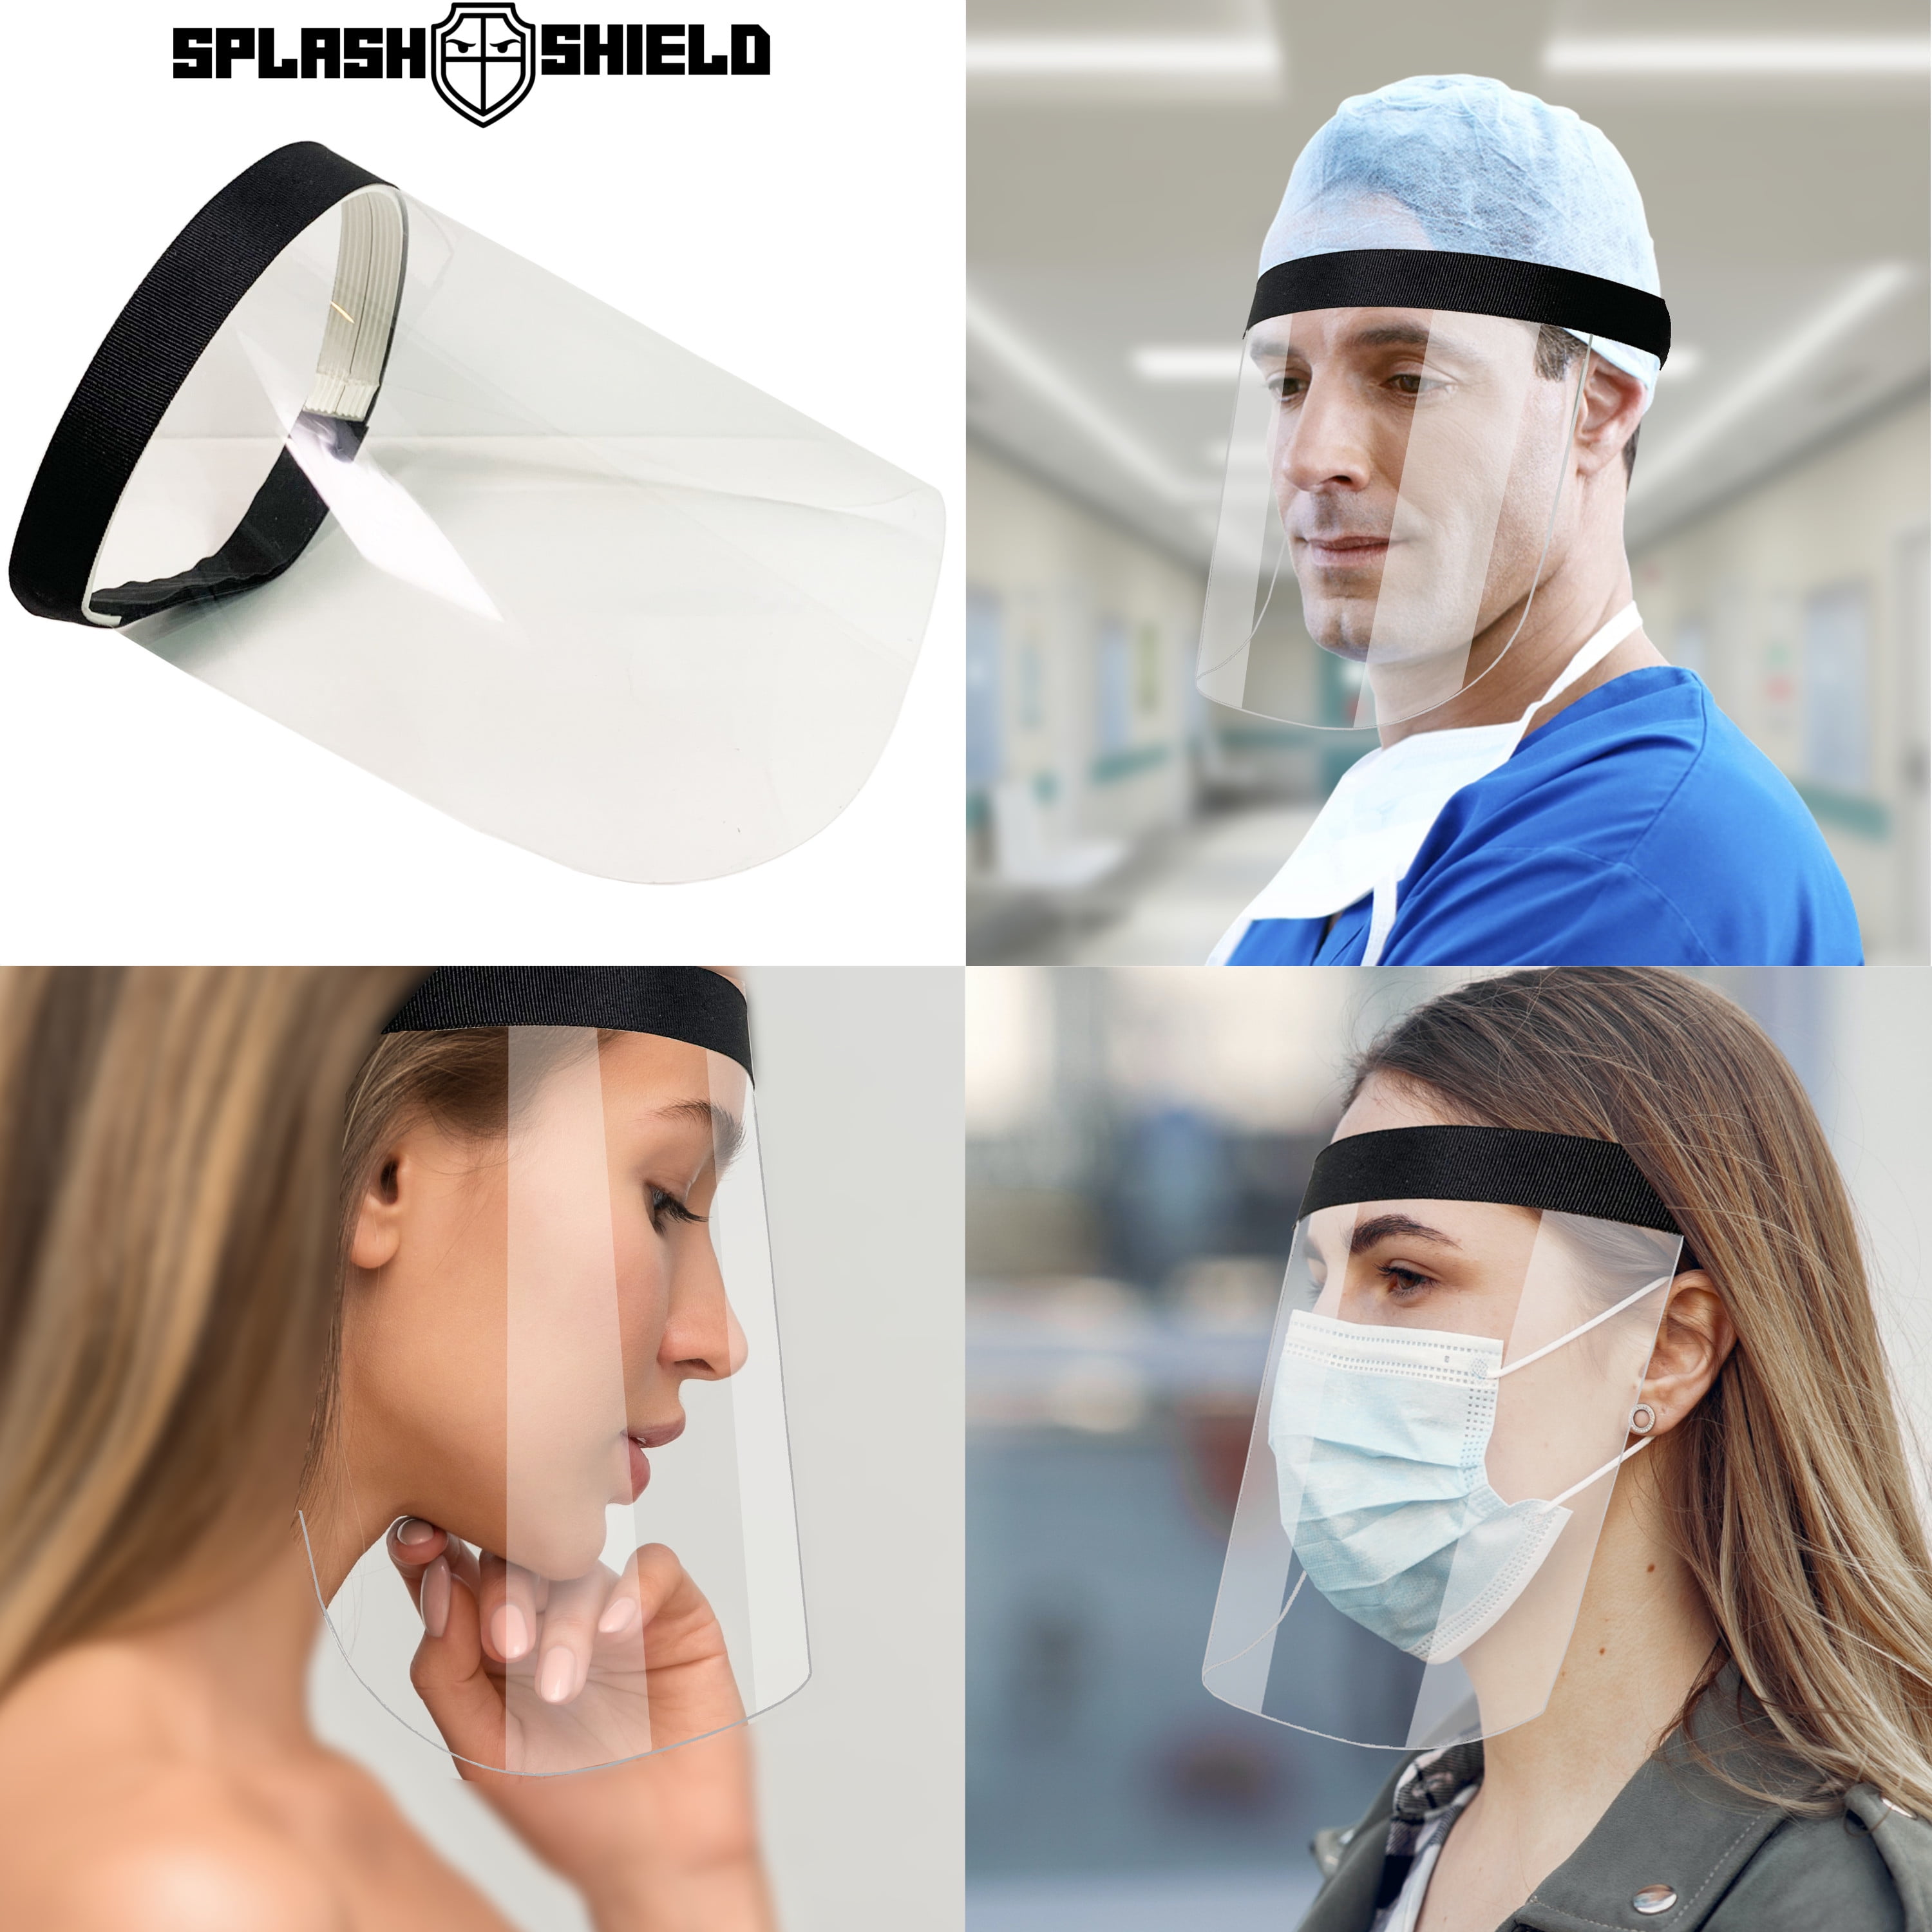 Details about   Safety Full Face Shield Clear Visor 1 PACK HEADGEAR 5 SHIELDS Mask Cover Medical 